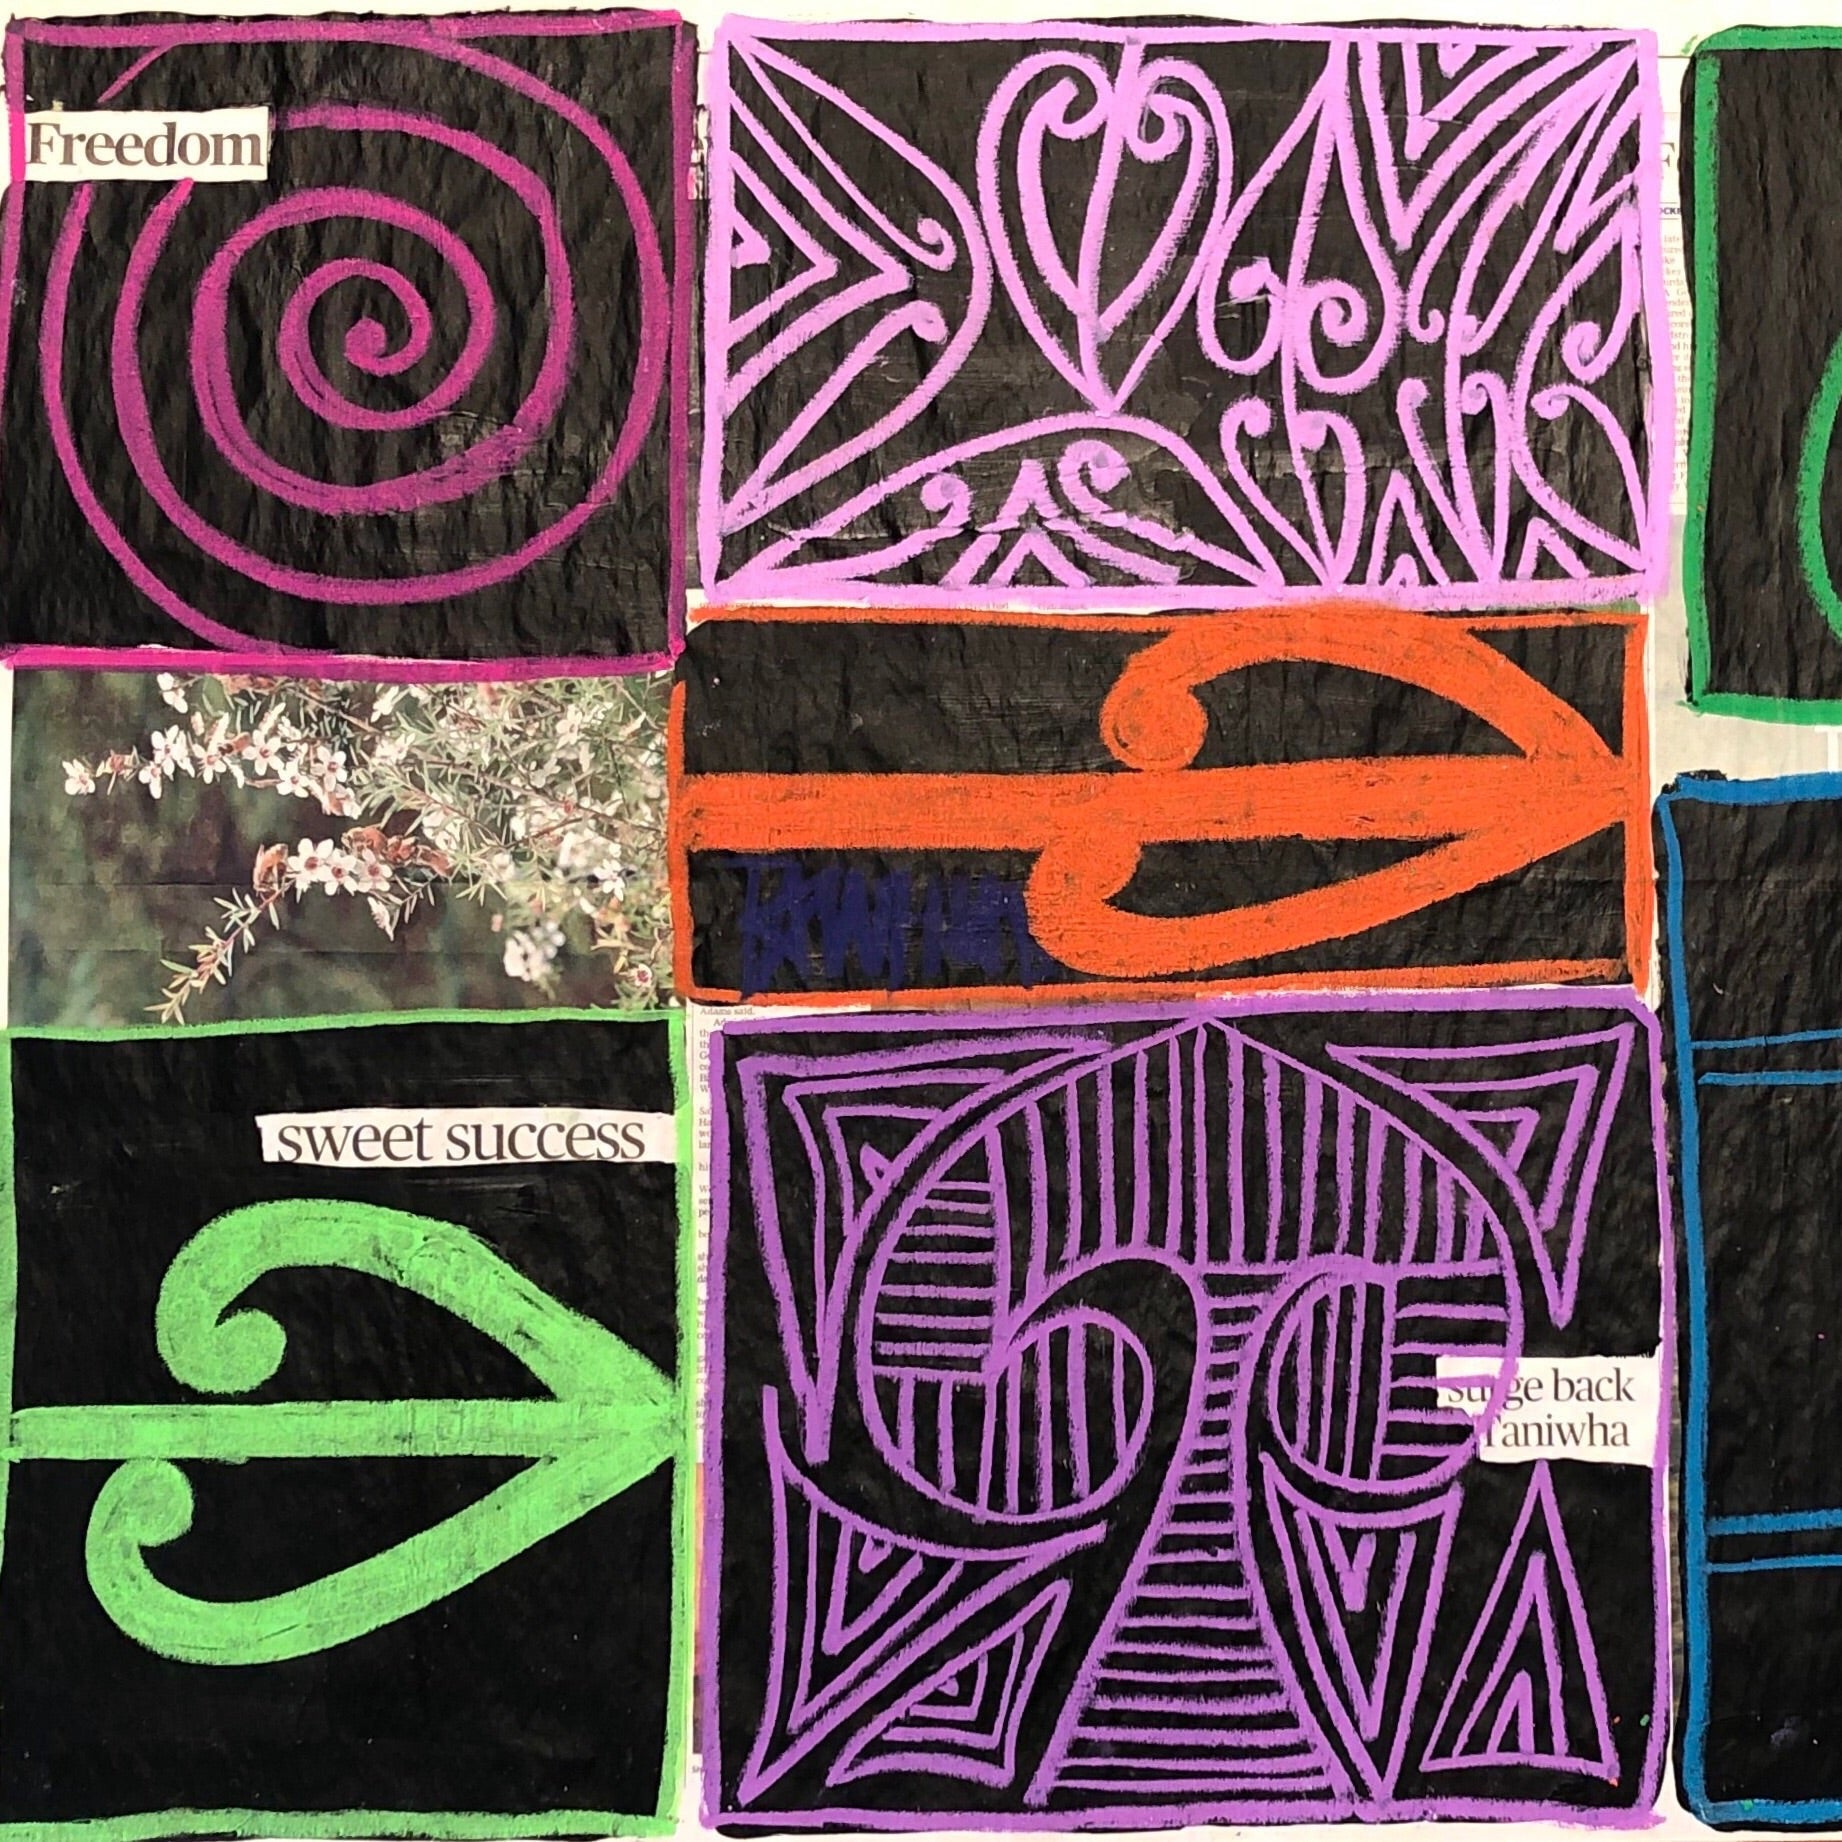 Colourful artwork with Māori symbols and select words